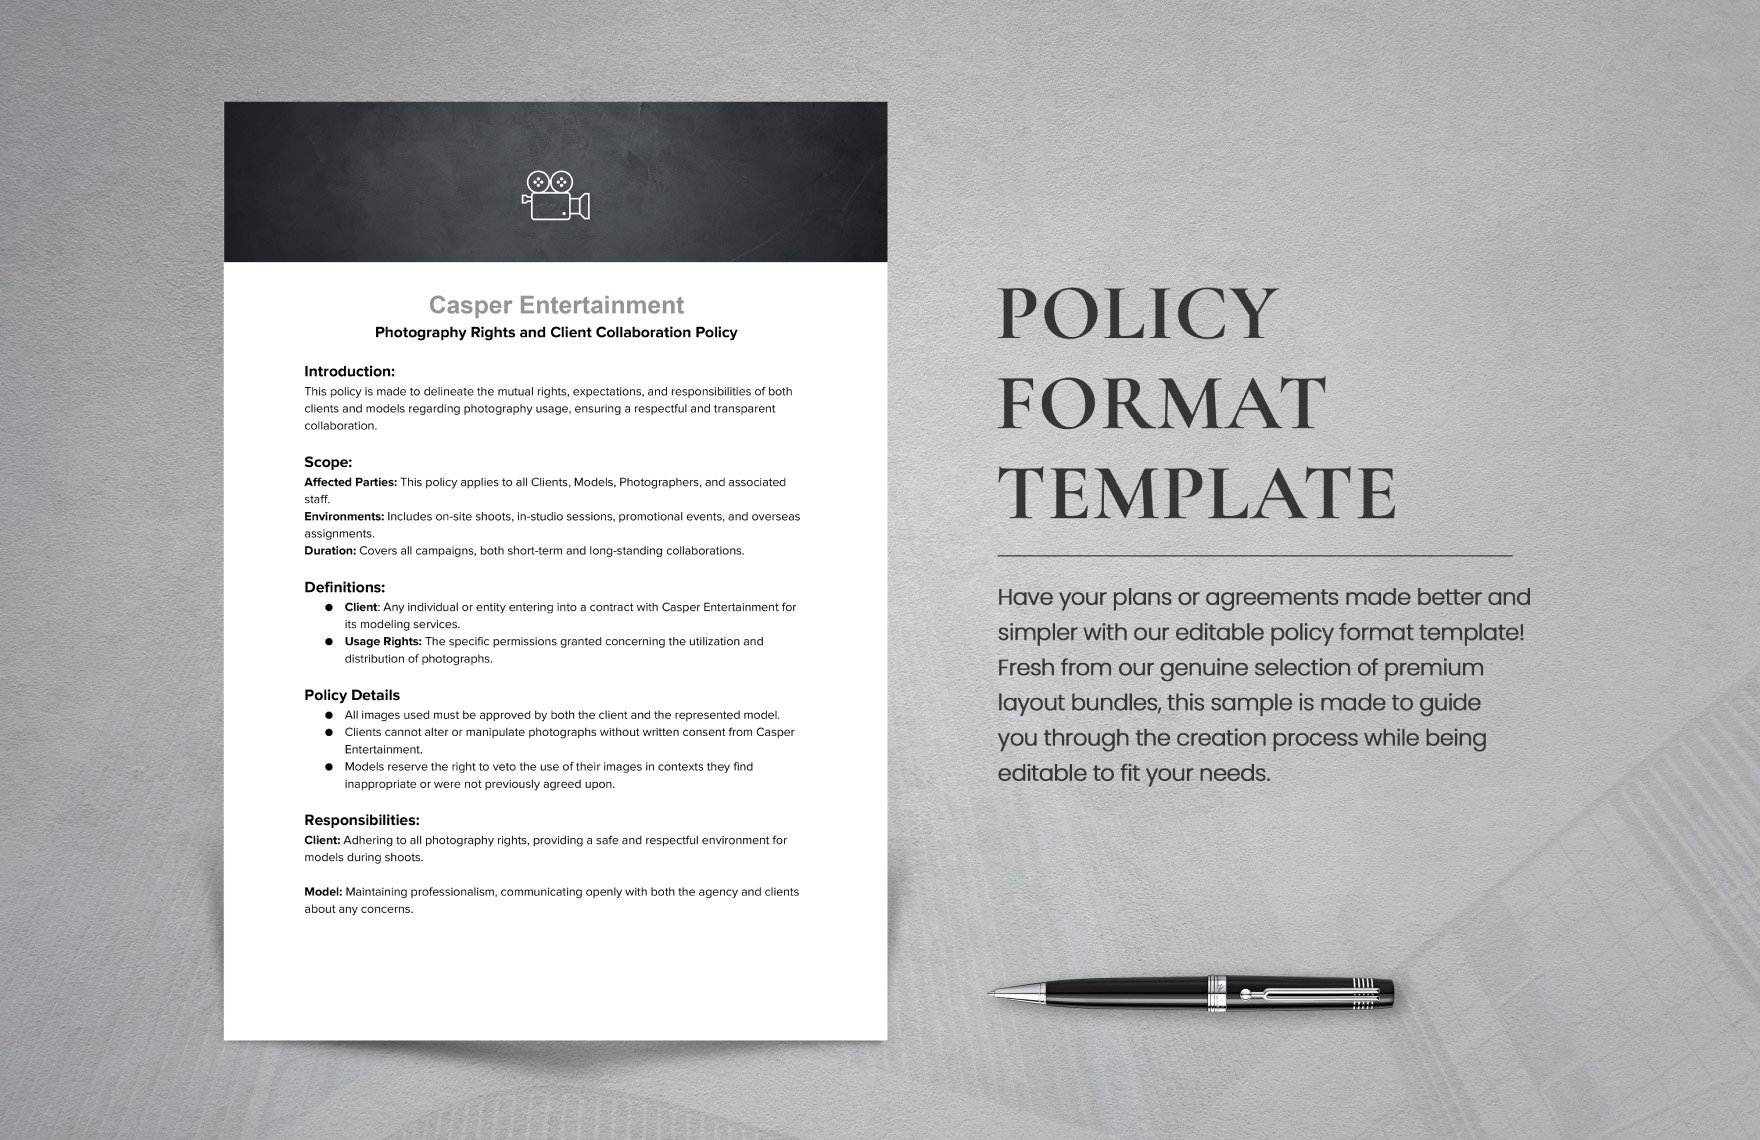 Policy Format Template